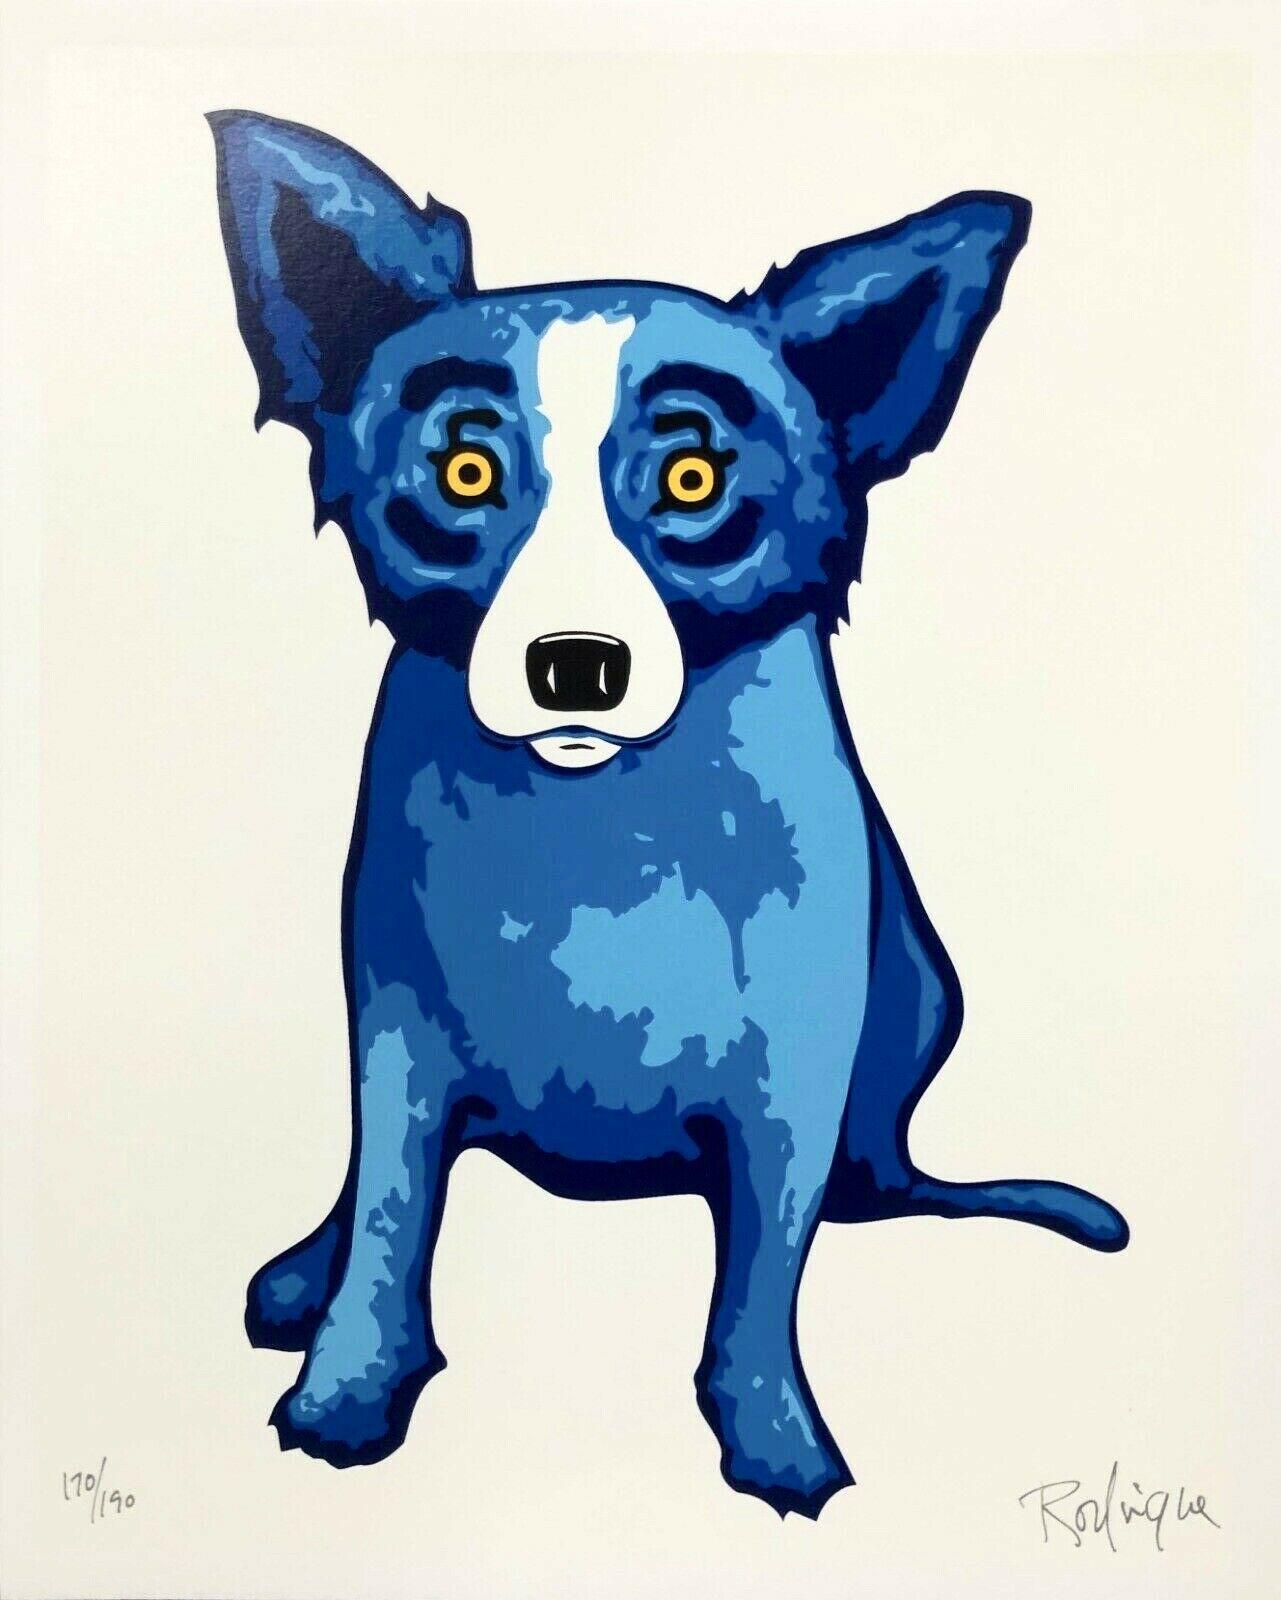 GEORGE RODRIGUE (1944 -2013) Pronounced rod-REEG, captures Louisiana landscapes and Cajun culture in his paintings. Rodrigue's style and popularity shifted when he began painting a series focused on a single subject, now known as the Blue Dog. In